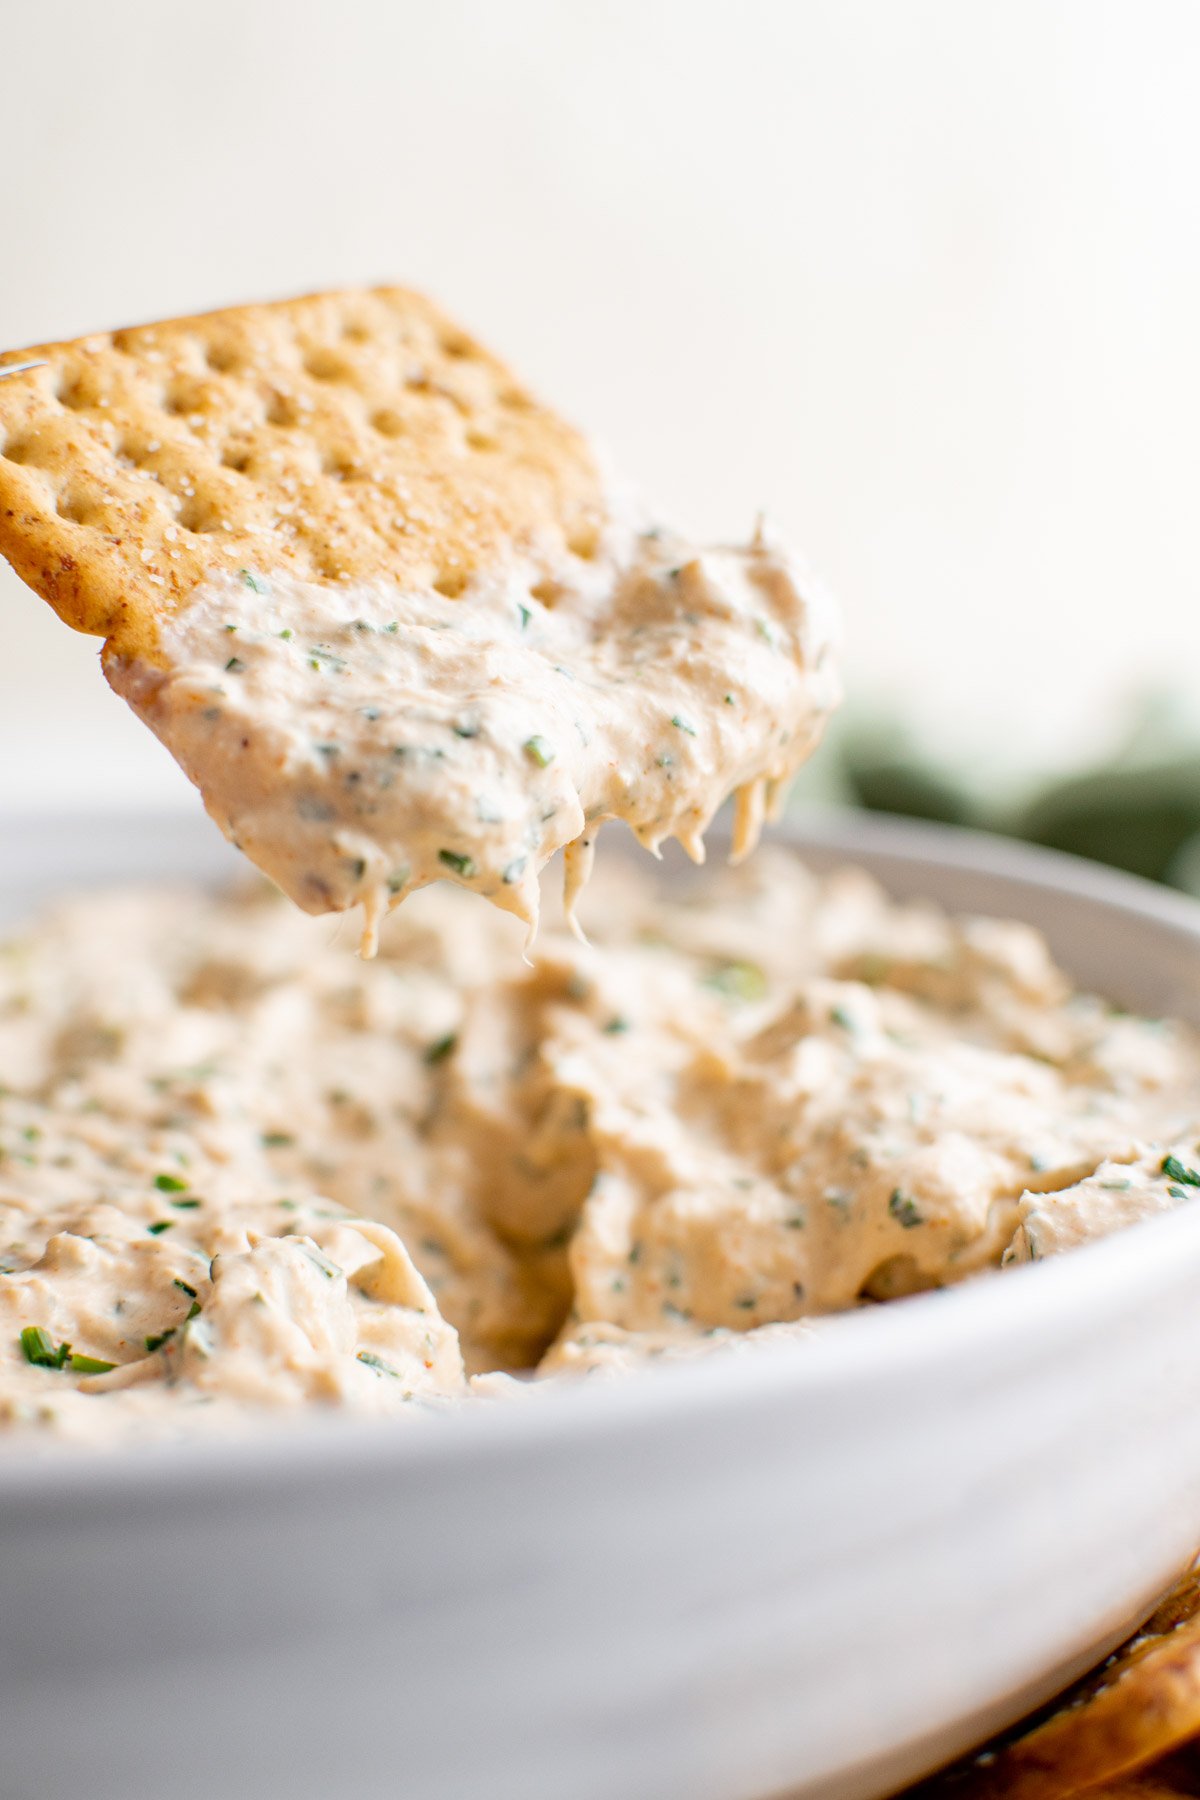 Smoke tuna dip in a white bowl and a cracker with dip on it.